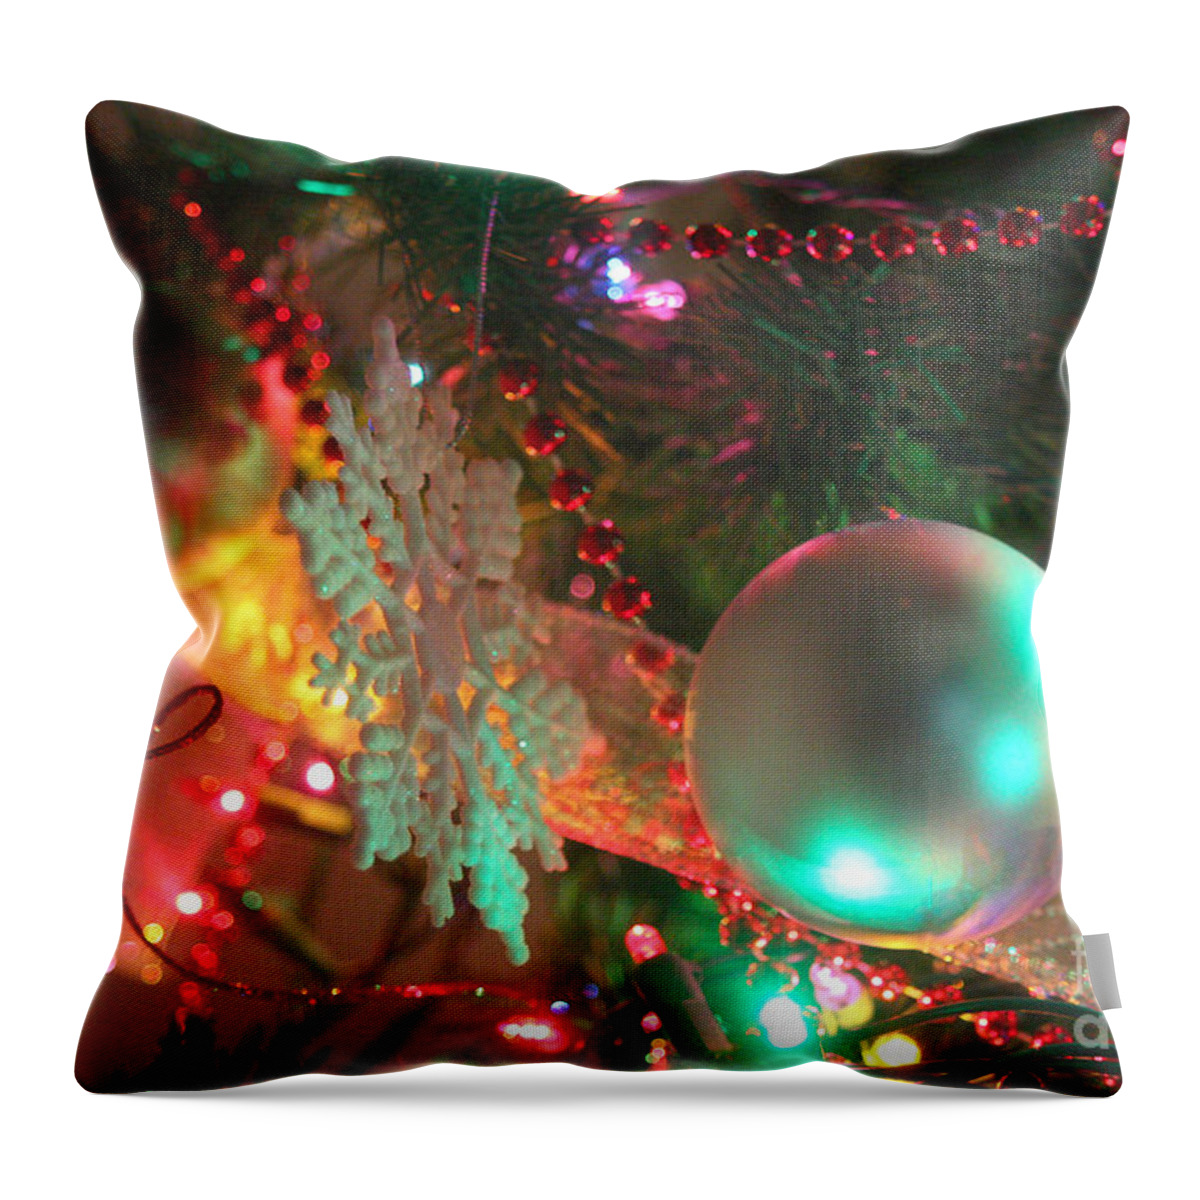 Merry Christmas Throw Pillow featuring the photograph Ornaments-2026 by Gary Gingrich Galleries